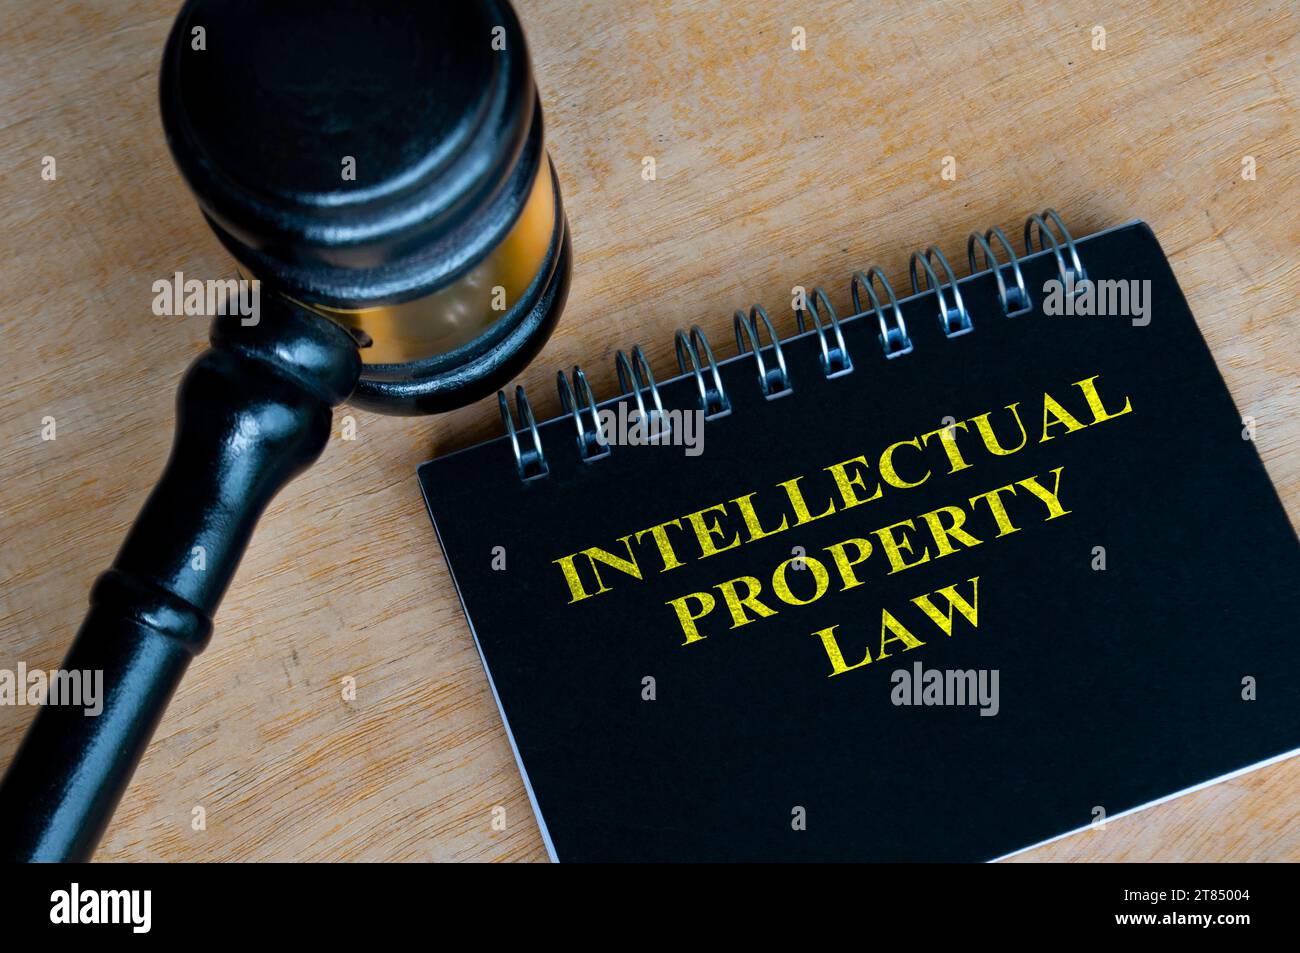 Top view of black notebook with text Intellectual Property Law and with gavel background Stock Photo